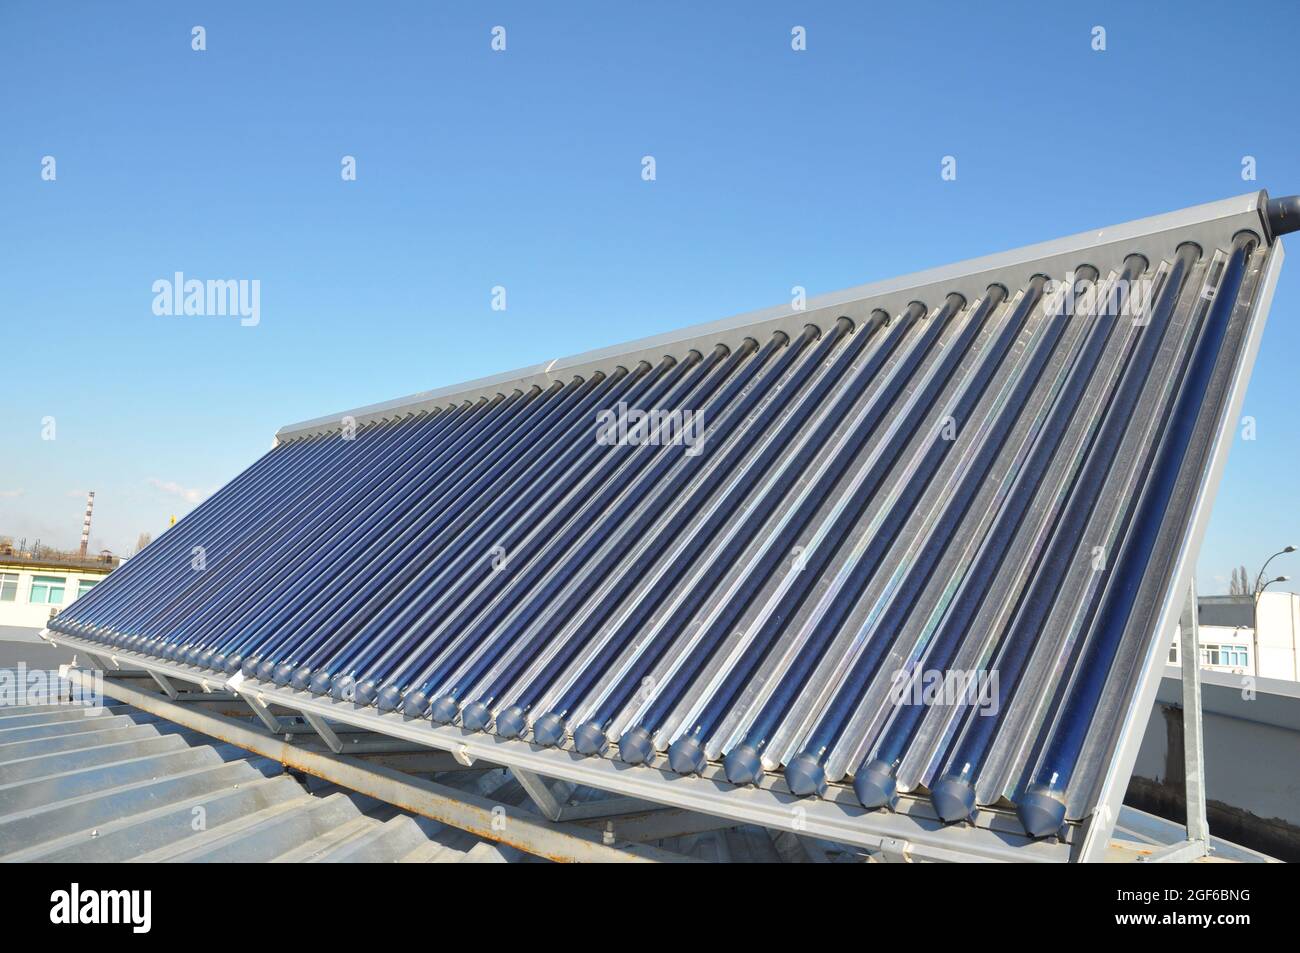 A close-up of an evacuated tube solar thermal hot water system, solar thermal panel collector installed on a metal roof against the blue sky. Stock Photo